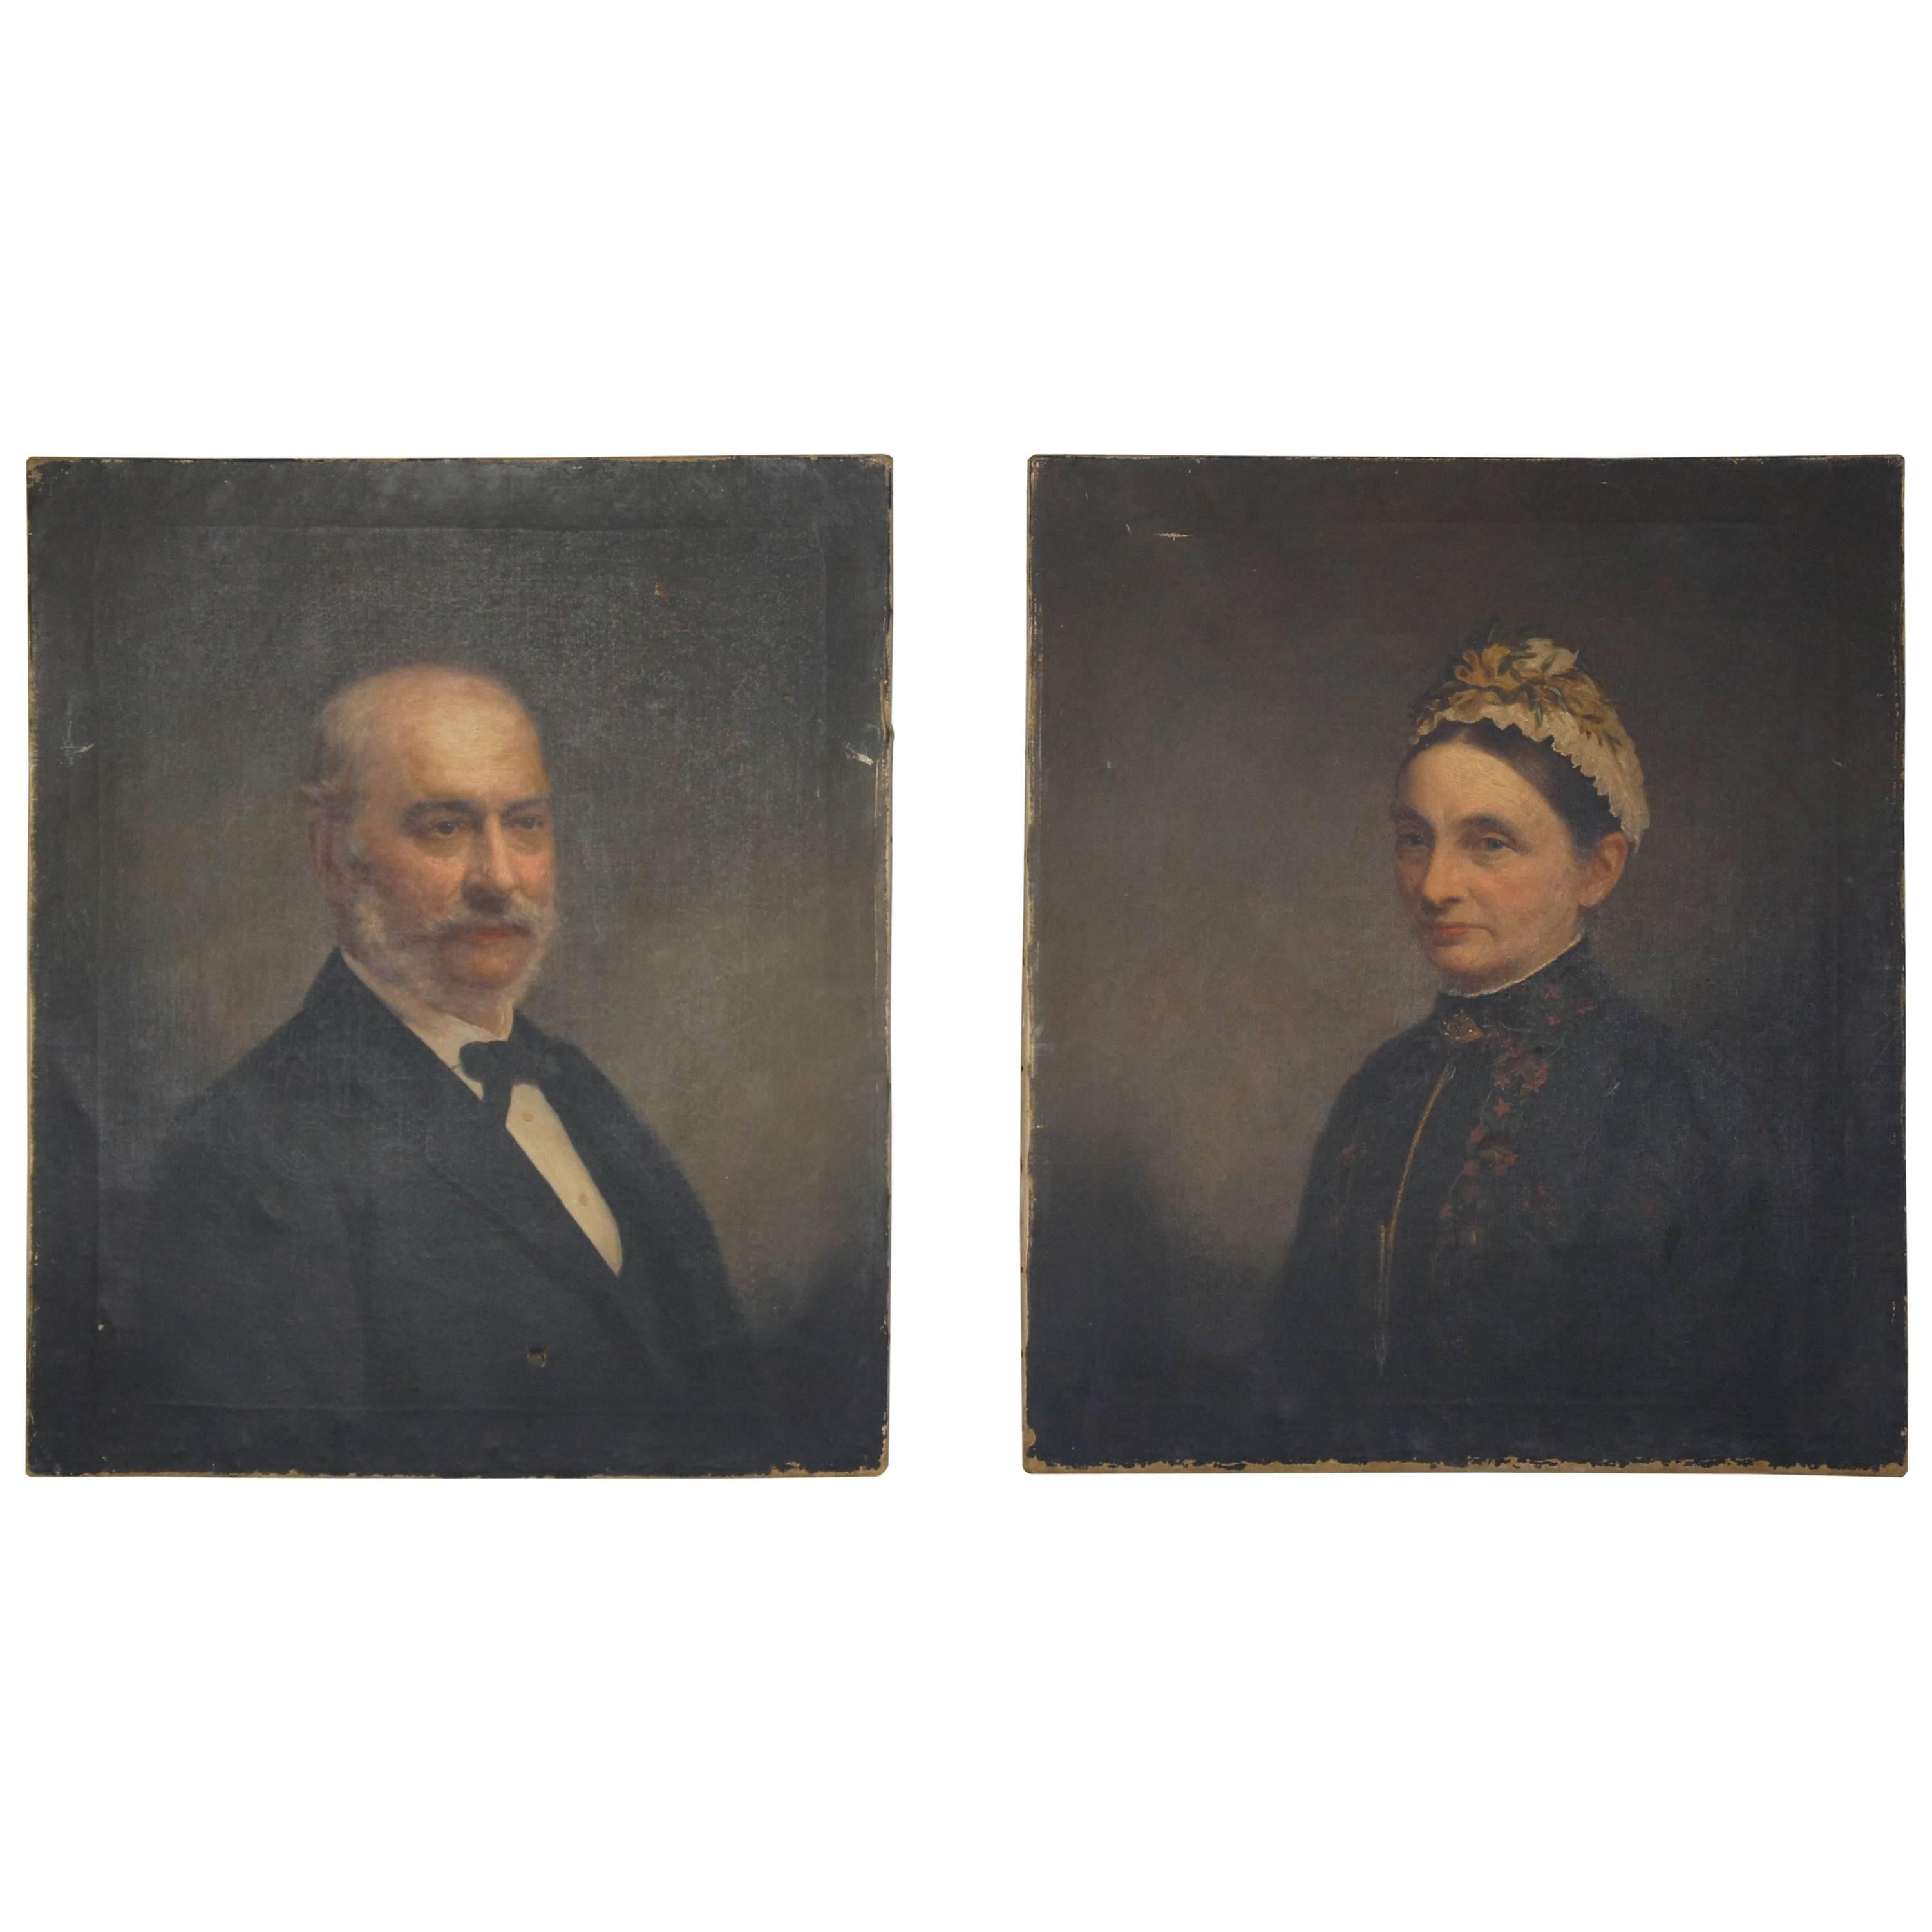 Signed and Dated, J. Horsburgh 1890, Oil on Canvas Portraits of Husband and Wife